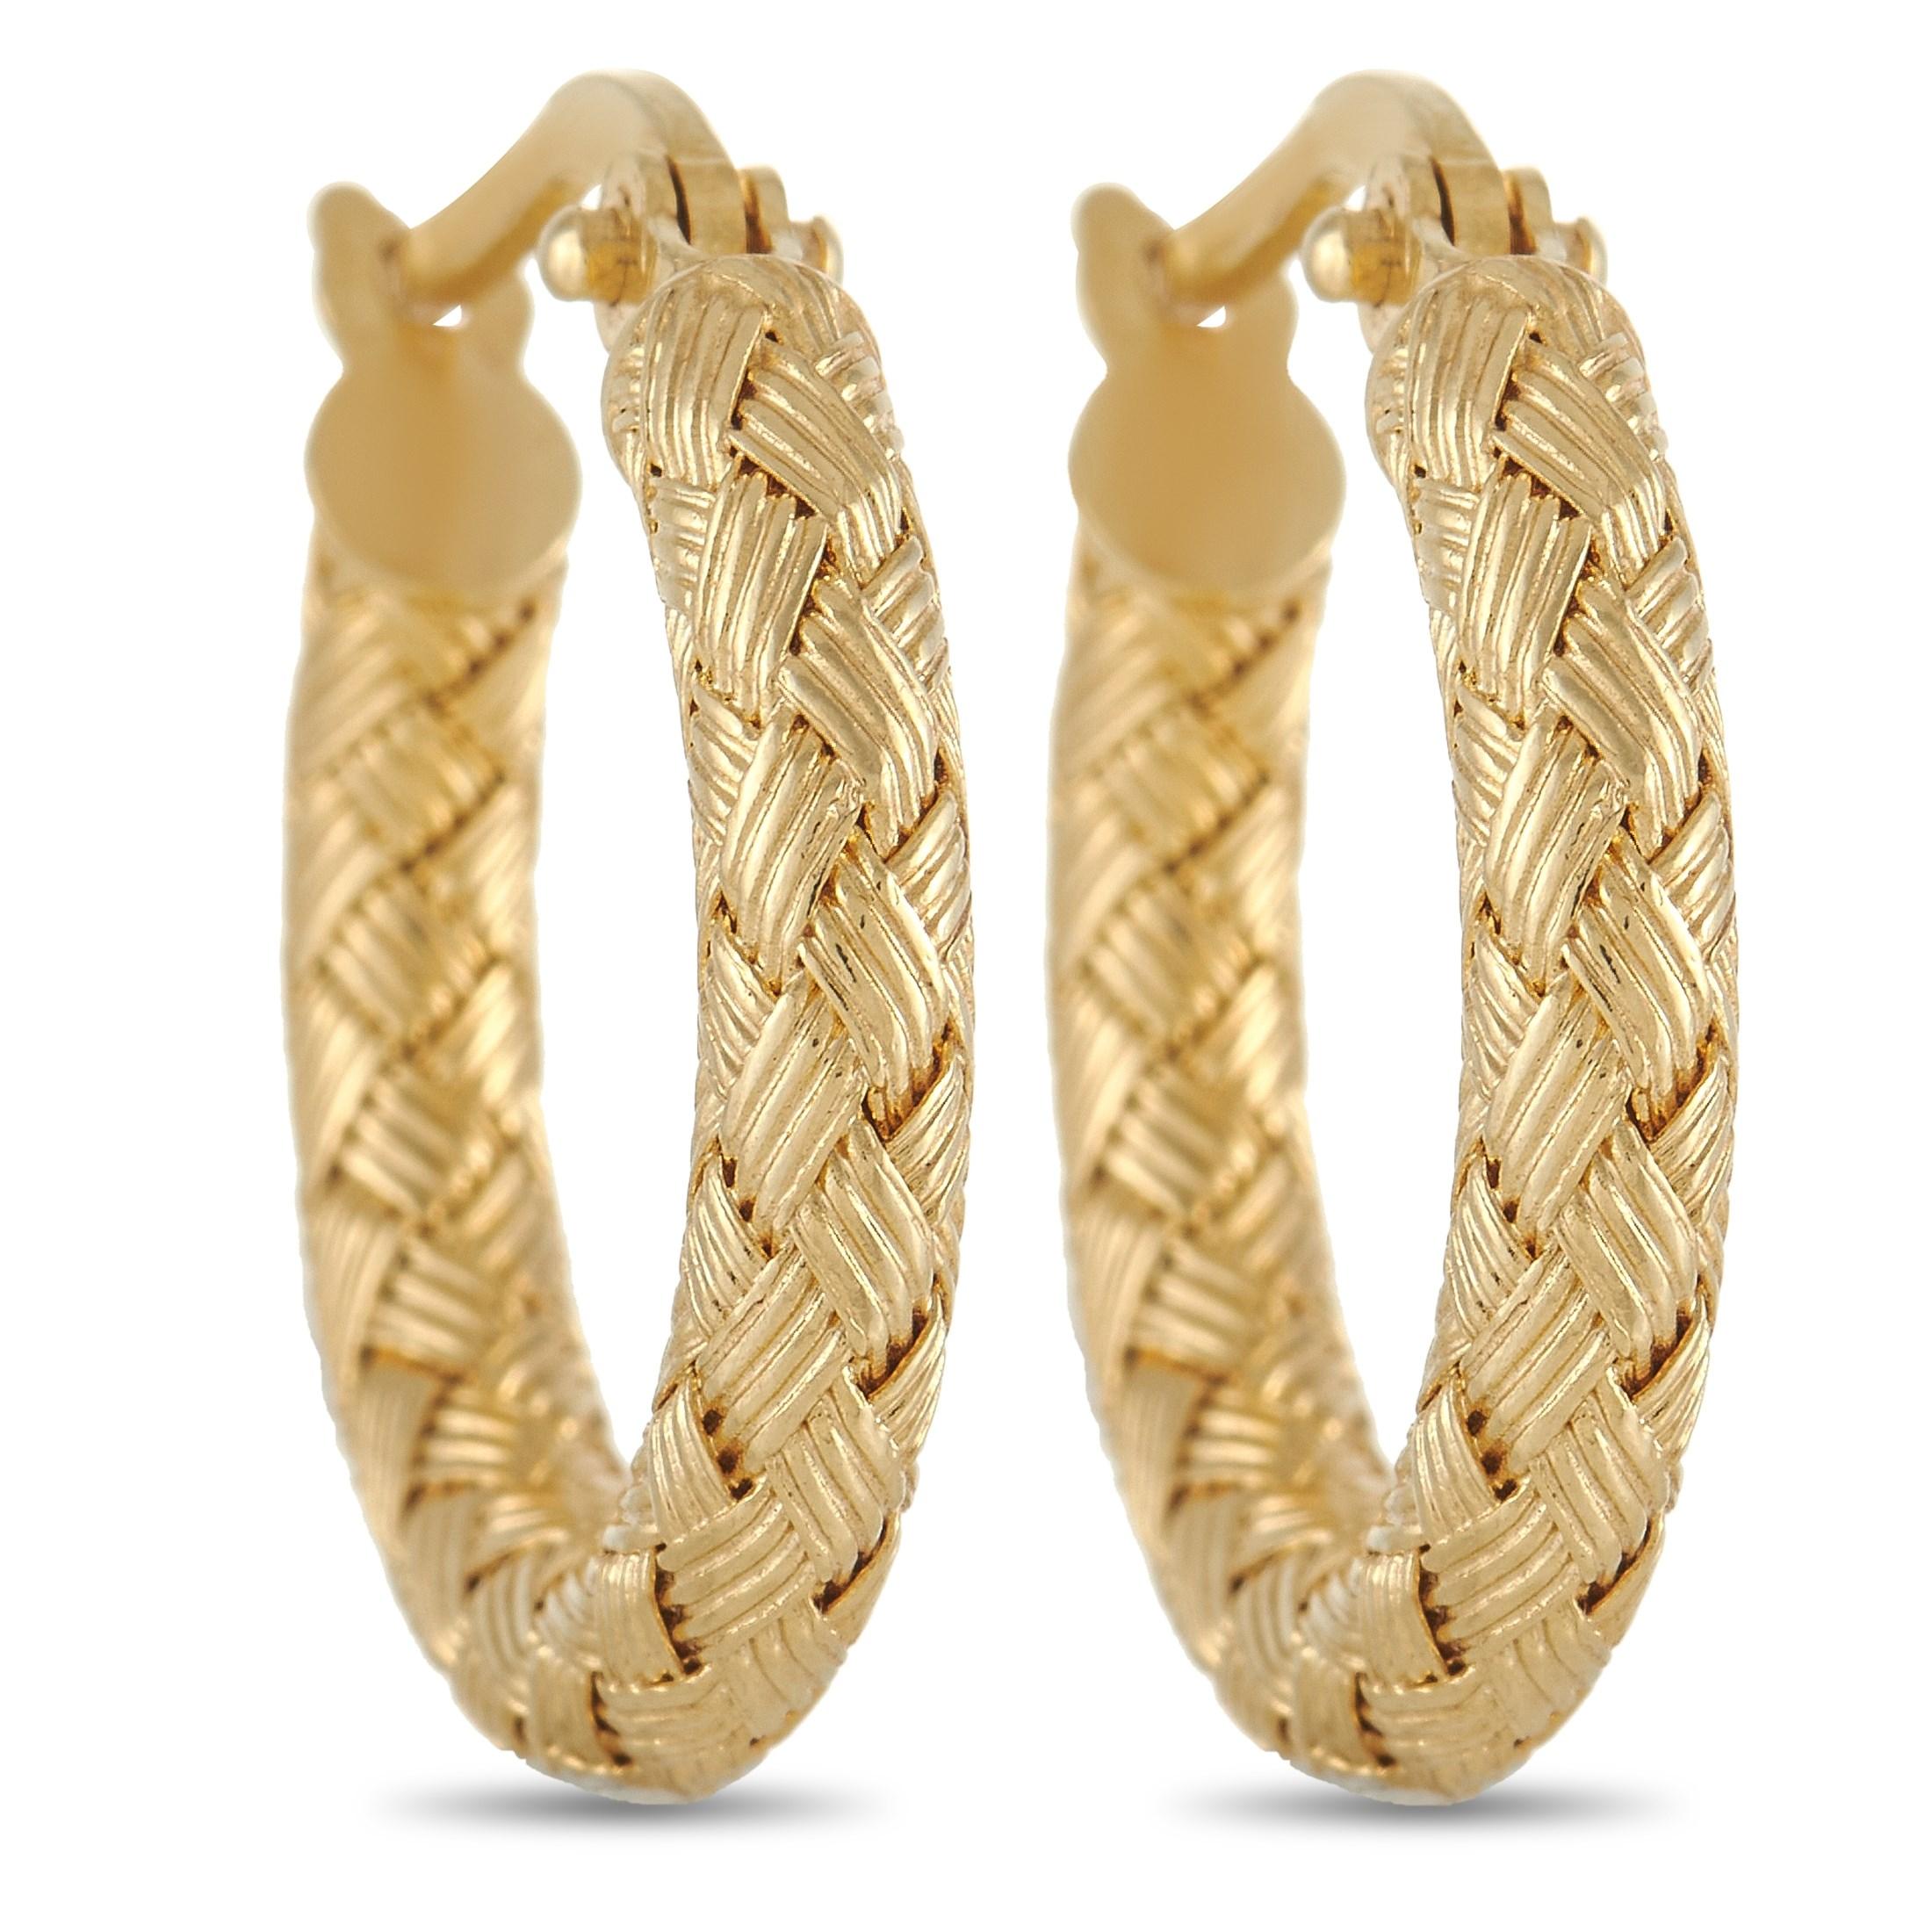 These lovely Roberto Coin hoop earrings are made with 18k yellow gold in a fine woven pattern. The earrings measure 0.63 inches in length and 0.63 inches in width with each weighing 1.7 grams for a total weight of 3.4 grams.

The earrings are